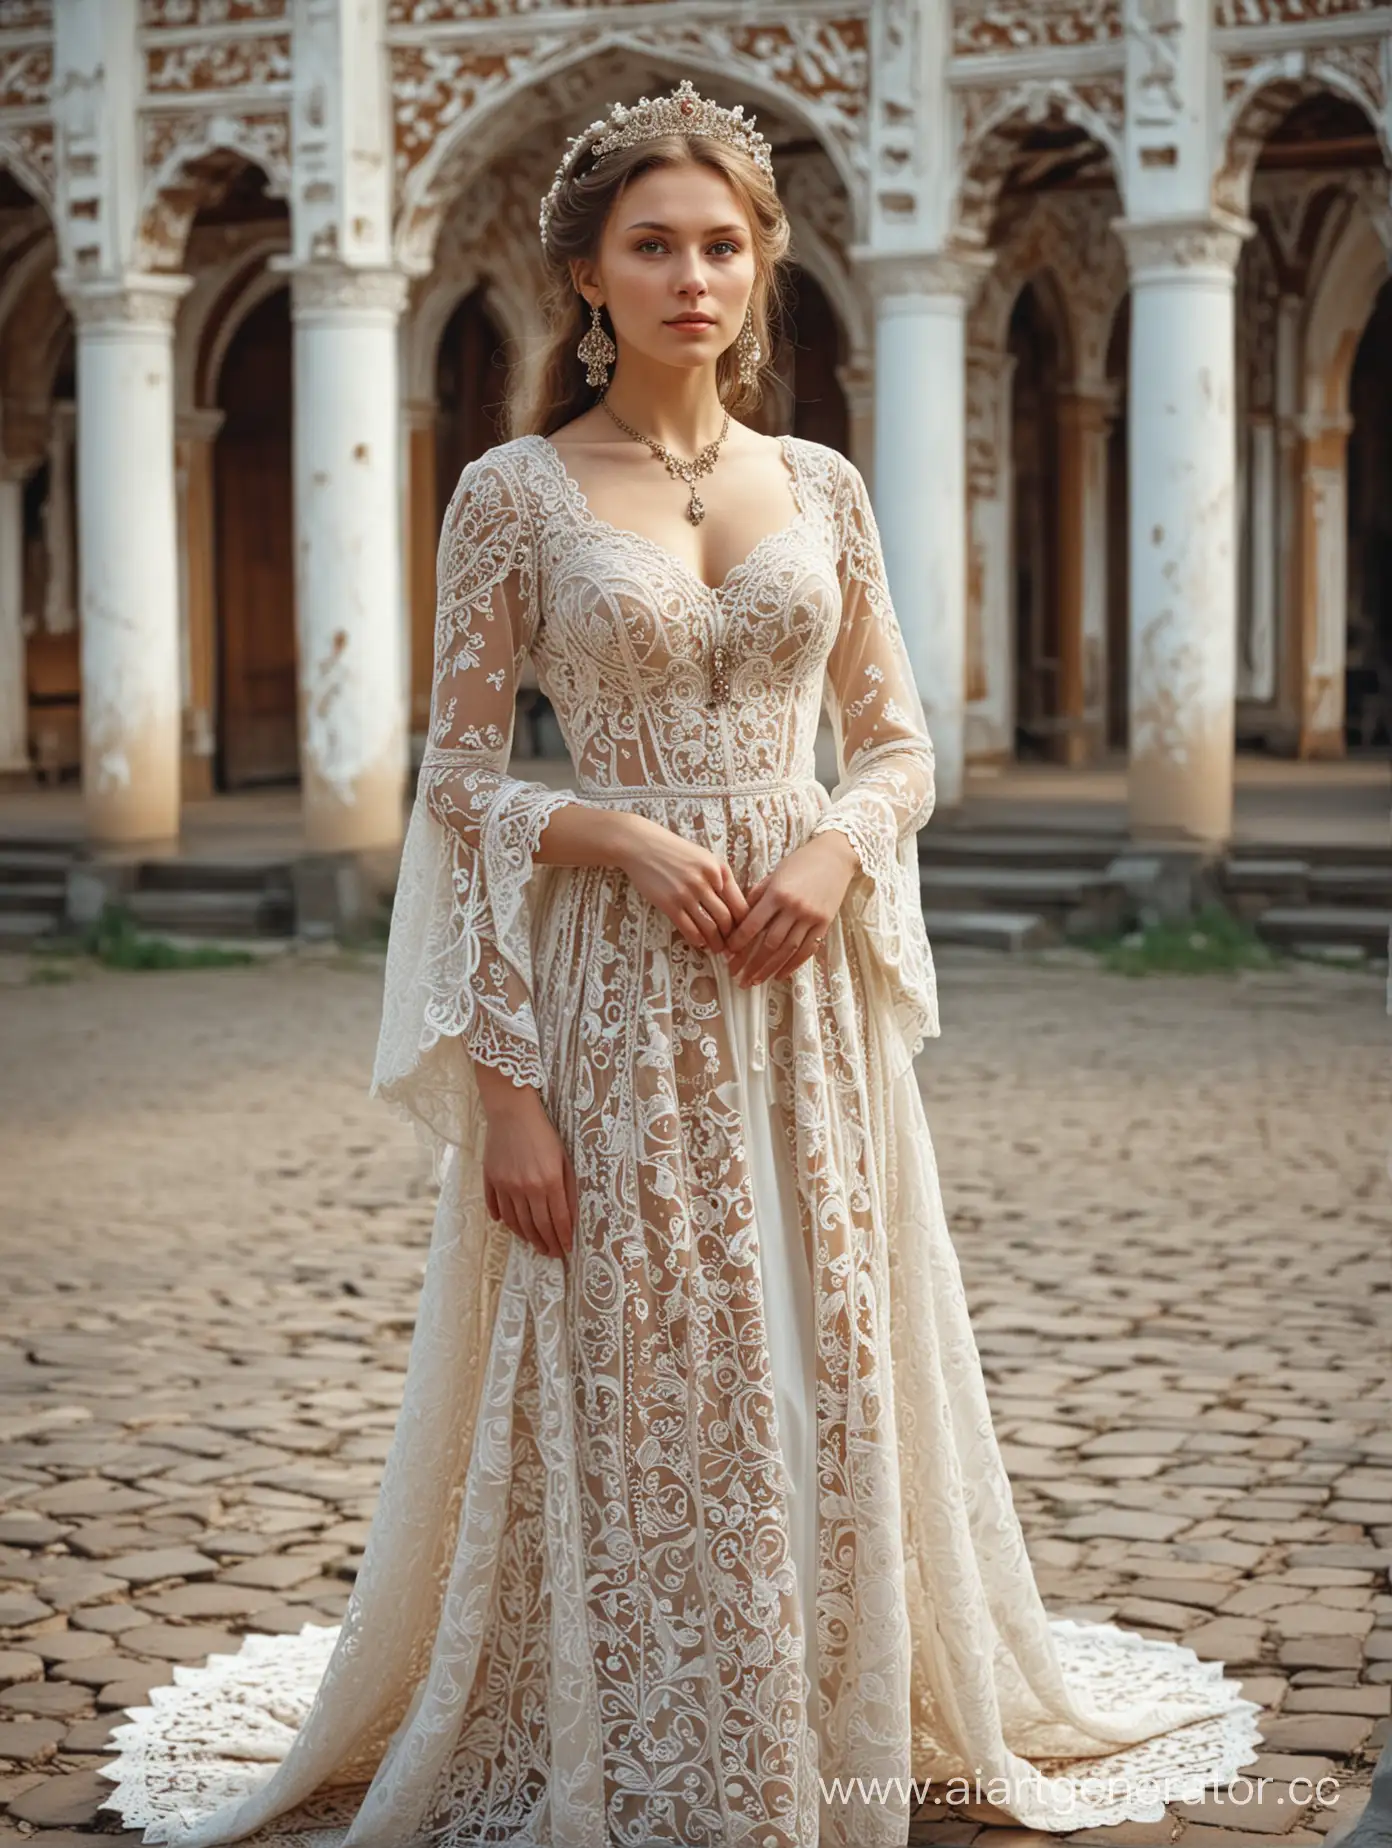 Russian-Beauty-in-Intricate-Lace-Dress-with-Ancient-Town-Background